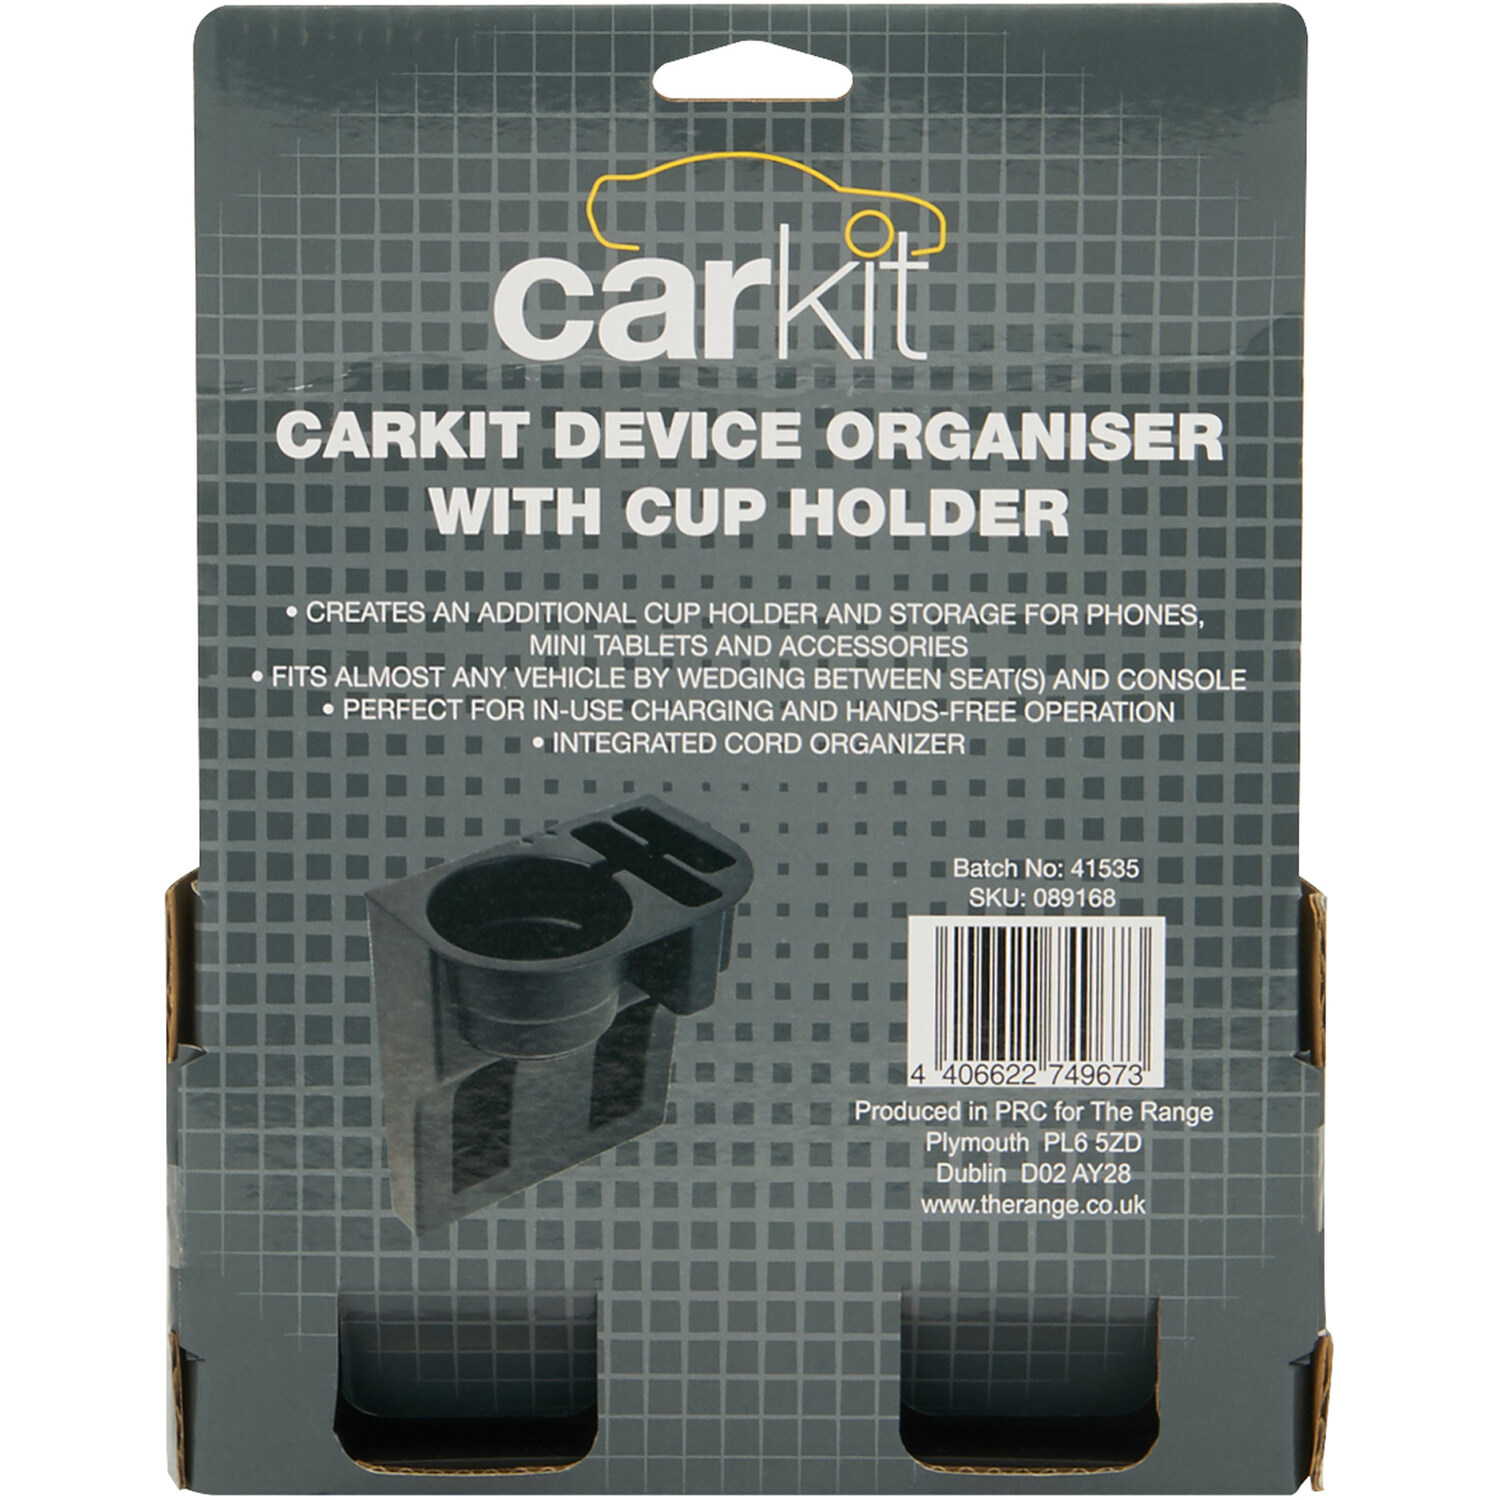 Carkit Device Organiser with Cup Holder Image 3